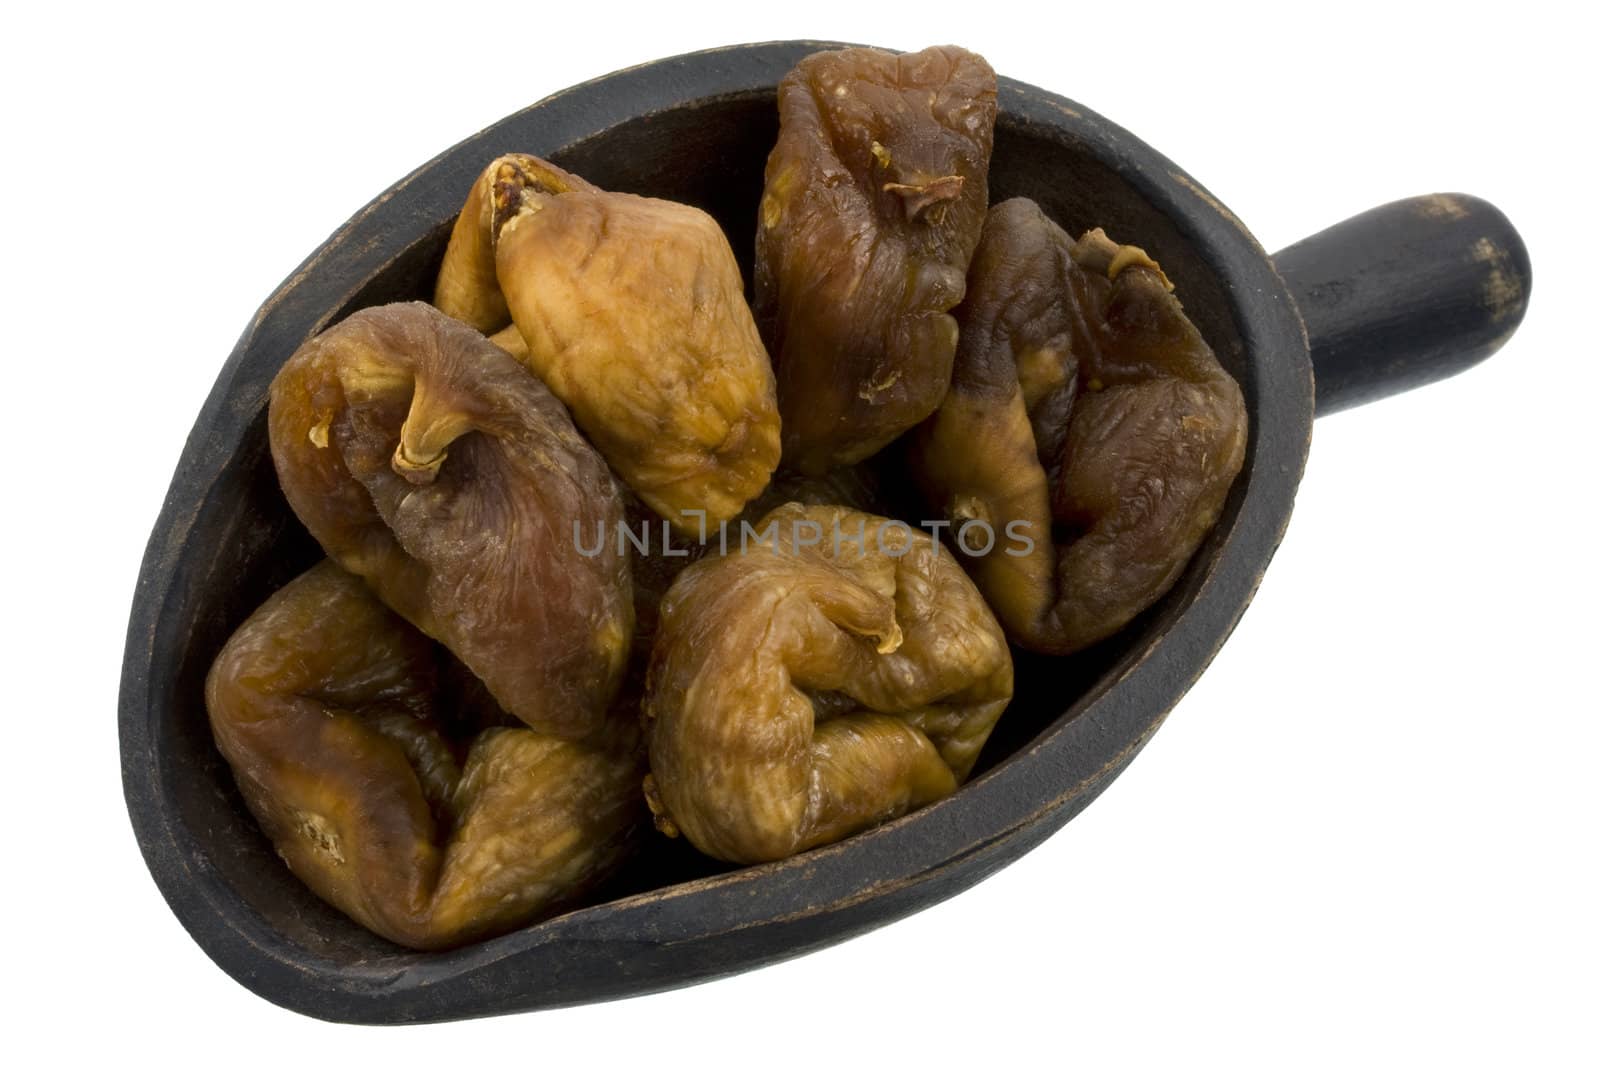 dried Turkish figs on a rustic, wooden scoop, isolated on white